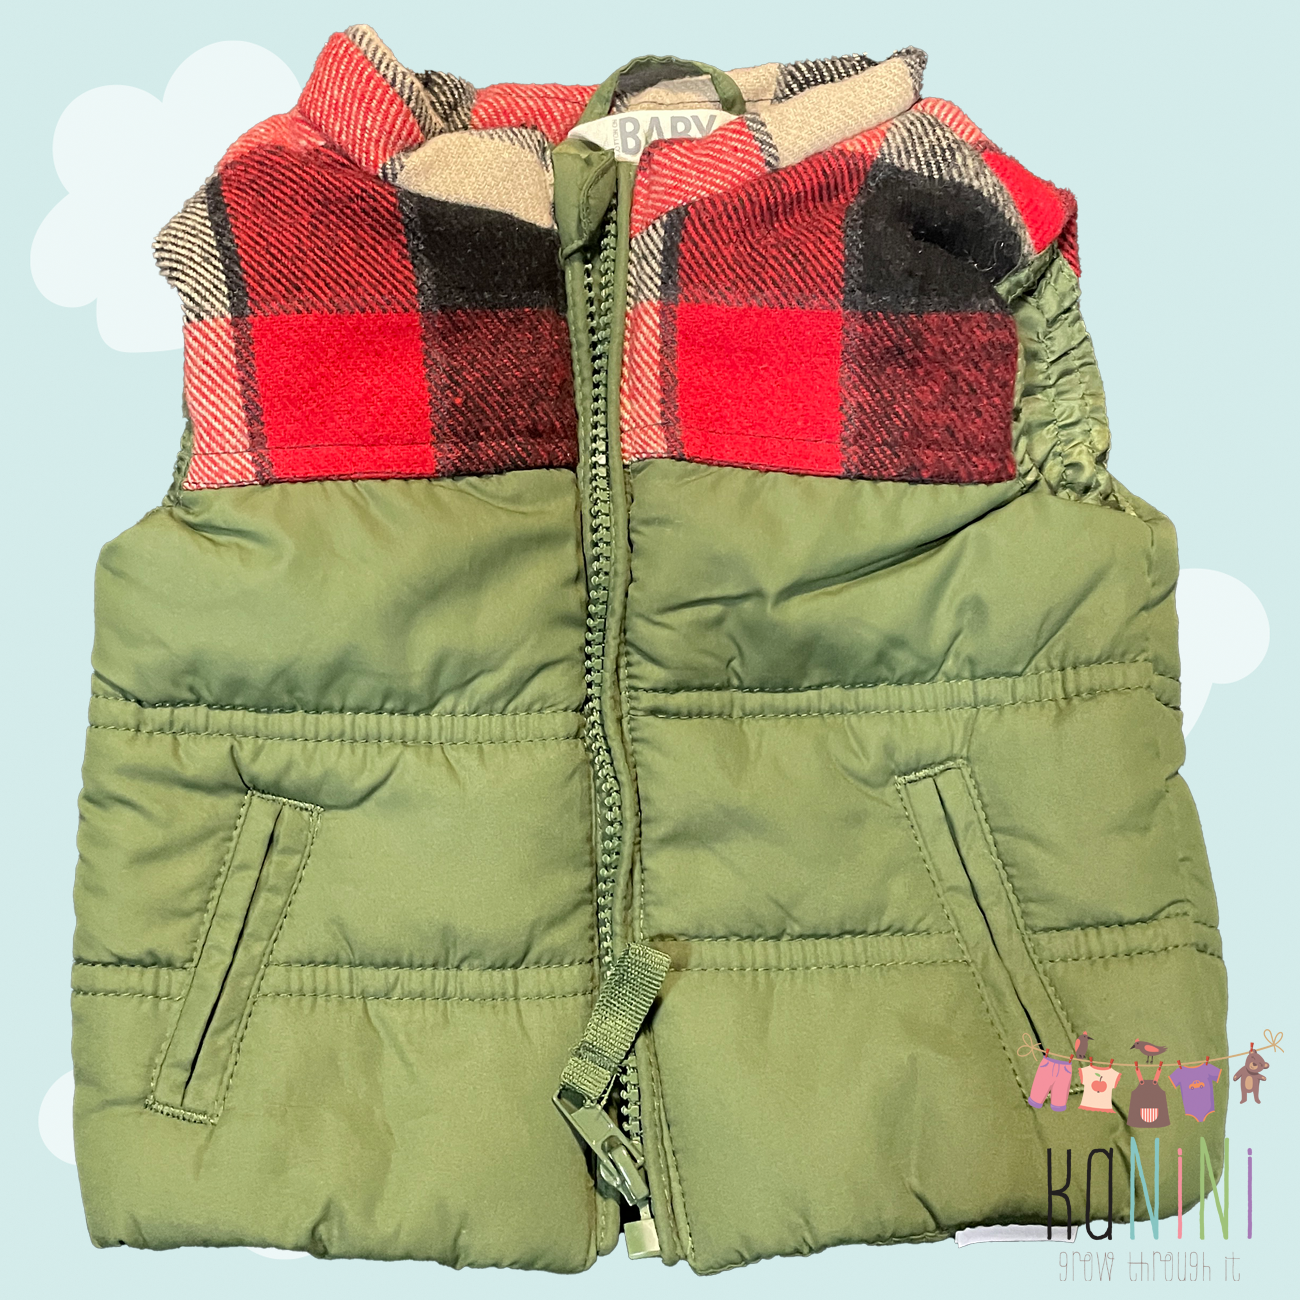 Featured image for “Cotton On 3 - 6 Months Boys Sleeveless Puffer Jacket”